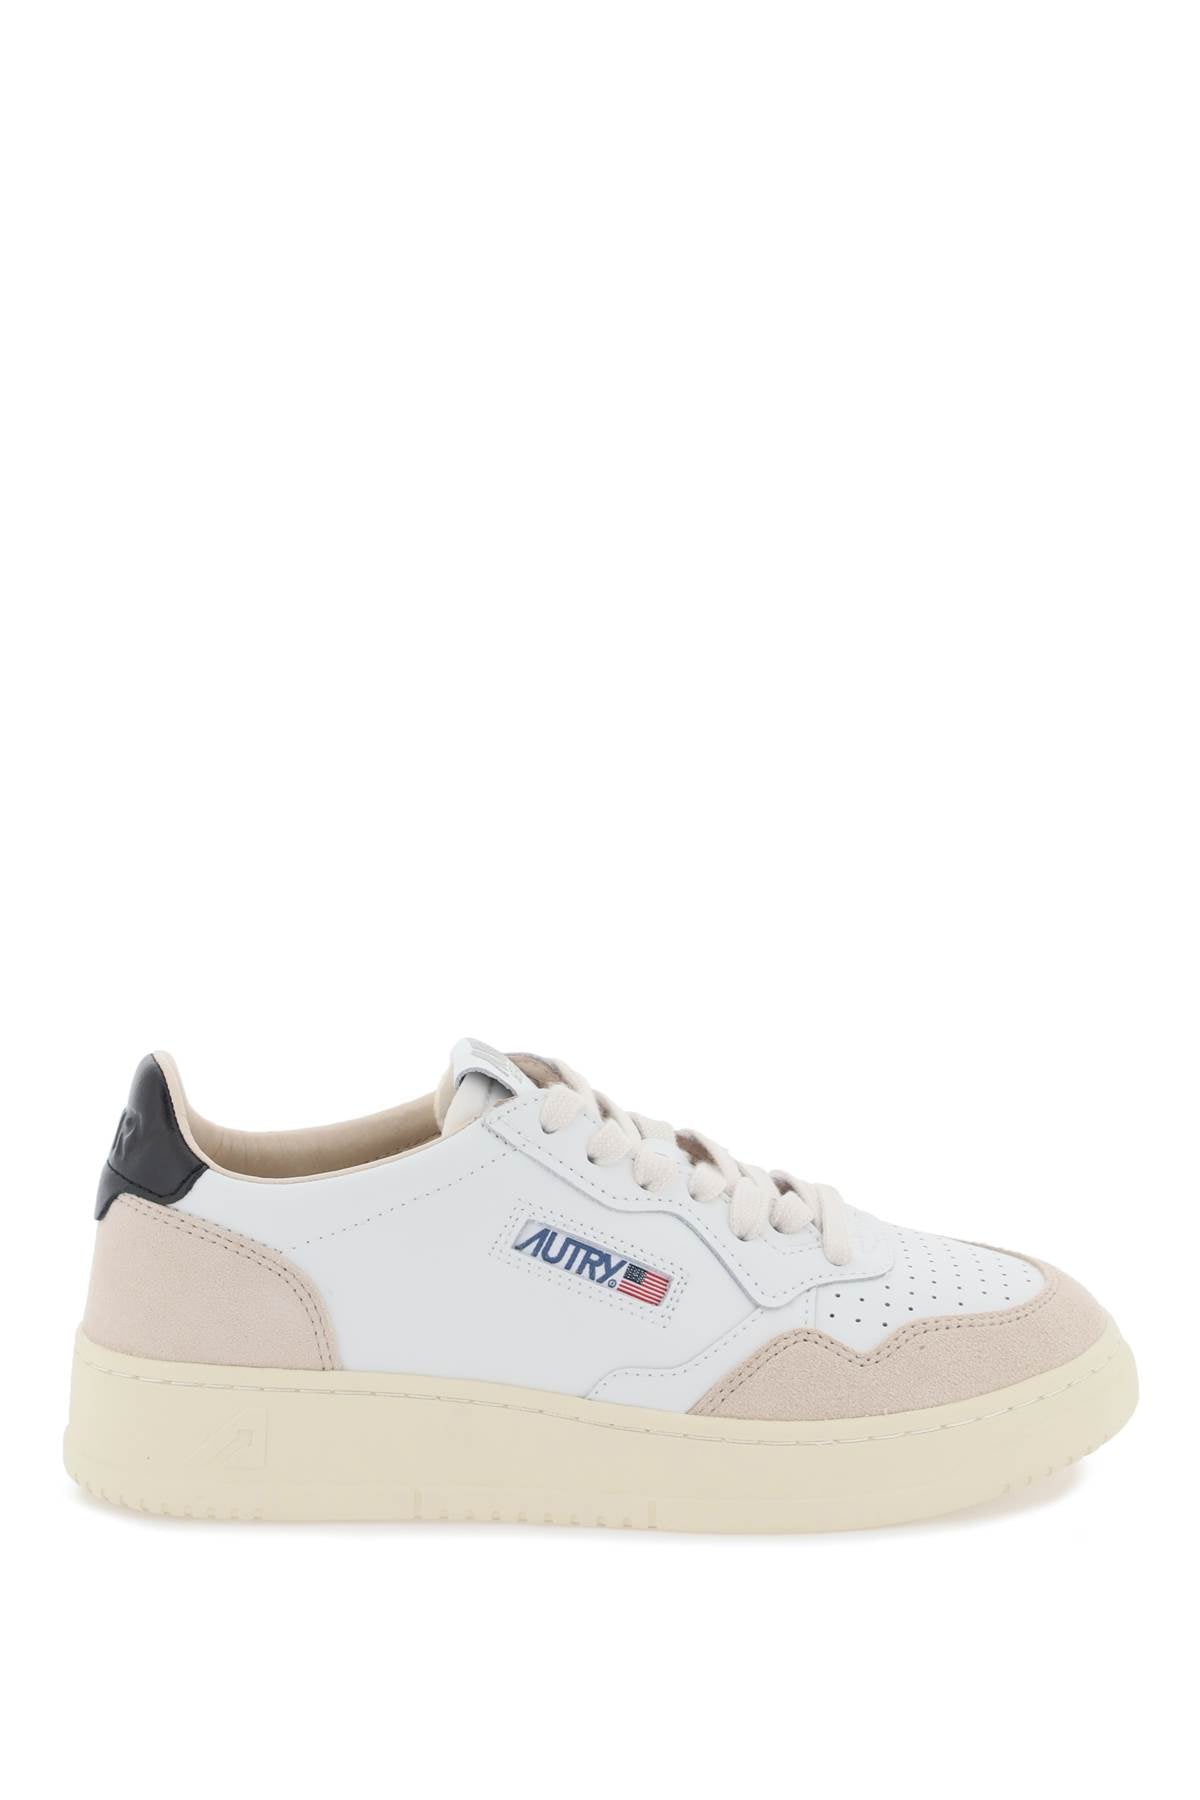 leather medalist low sneakers AULWLS21 WHITE BLACK